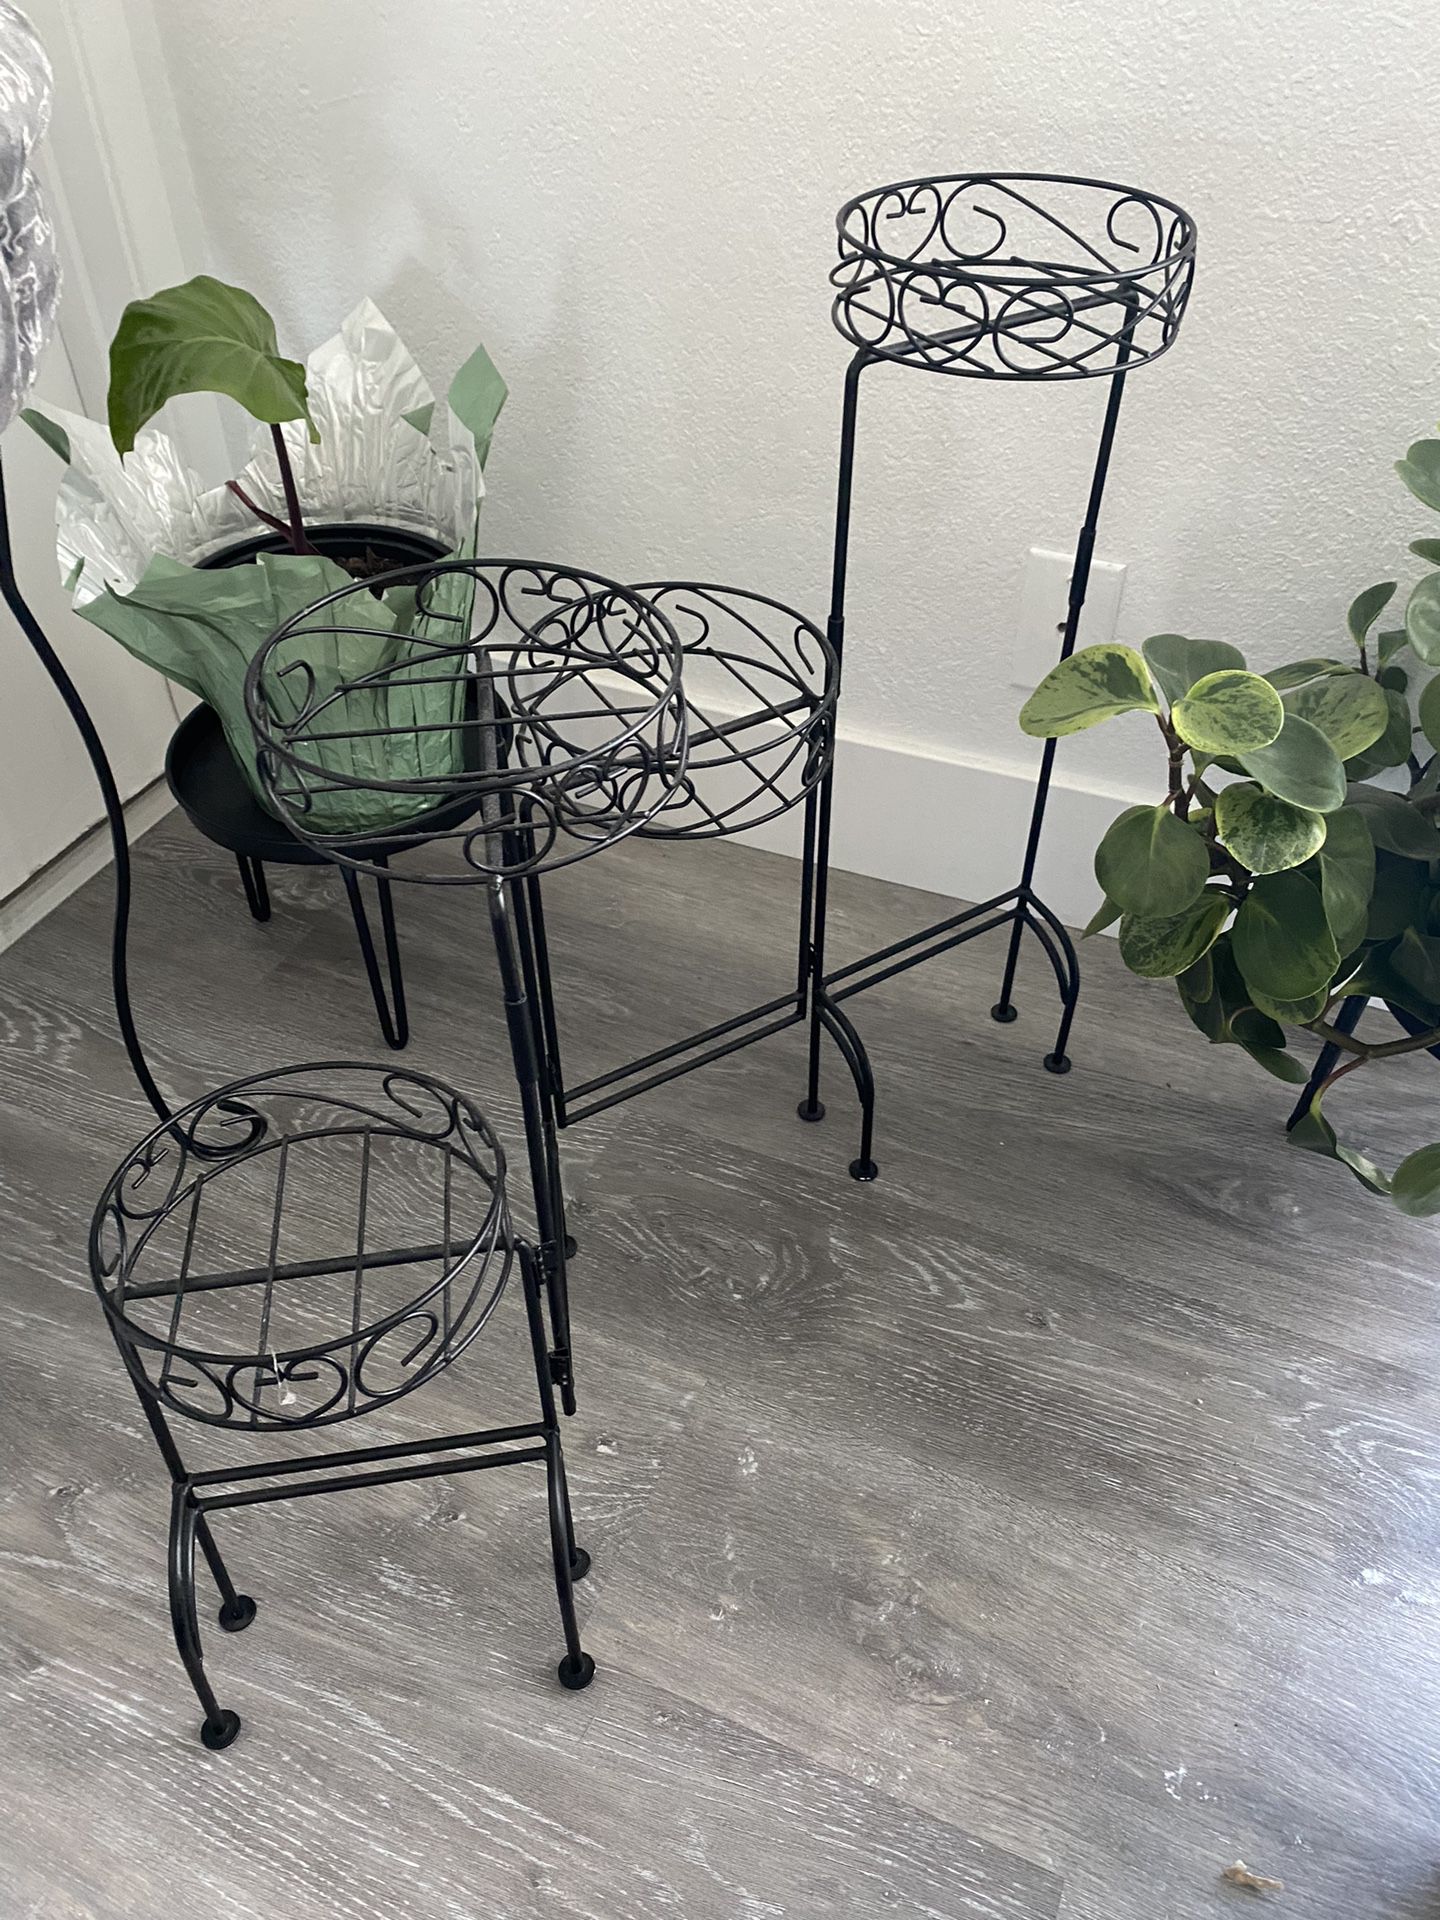 Plant Stand Holders. If You See This Post It’s Still Available!